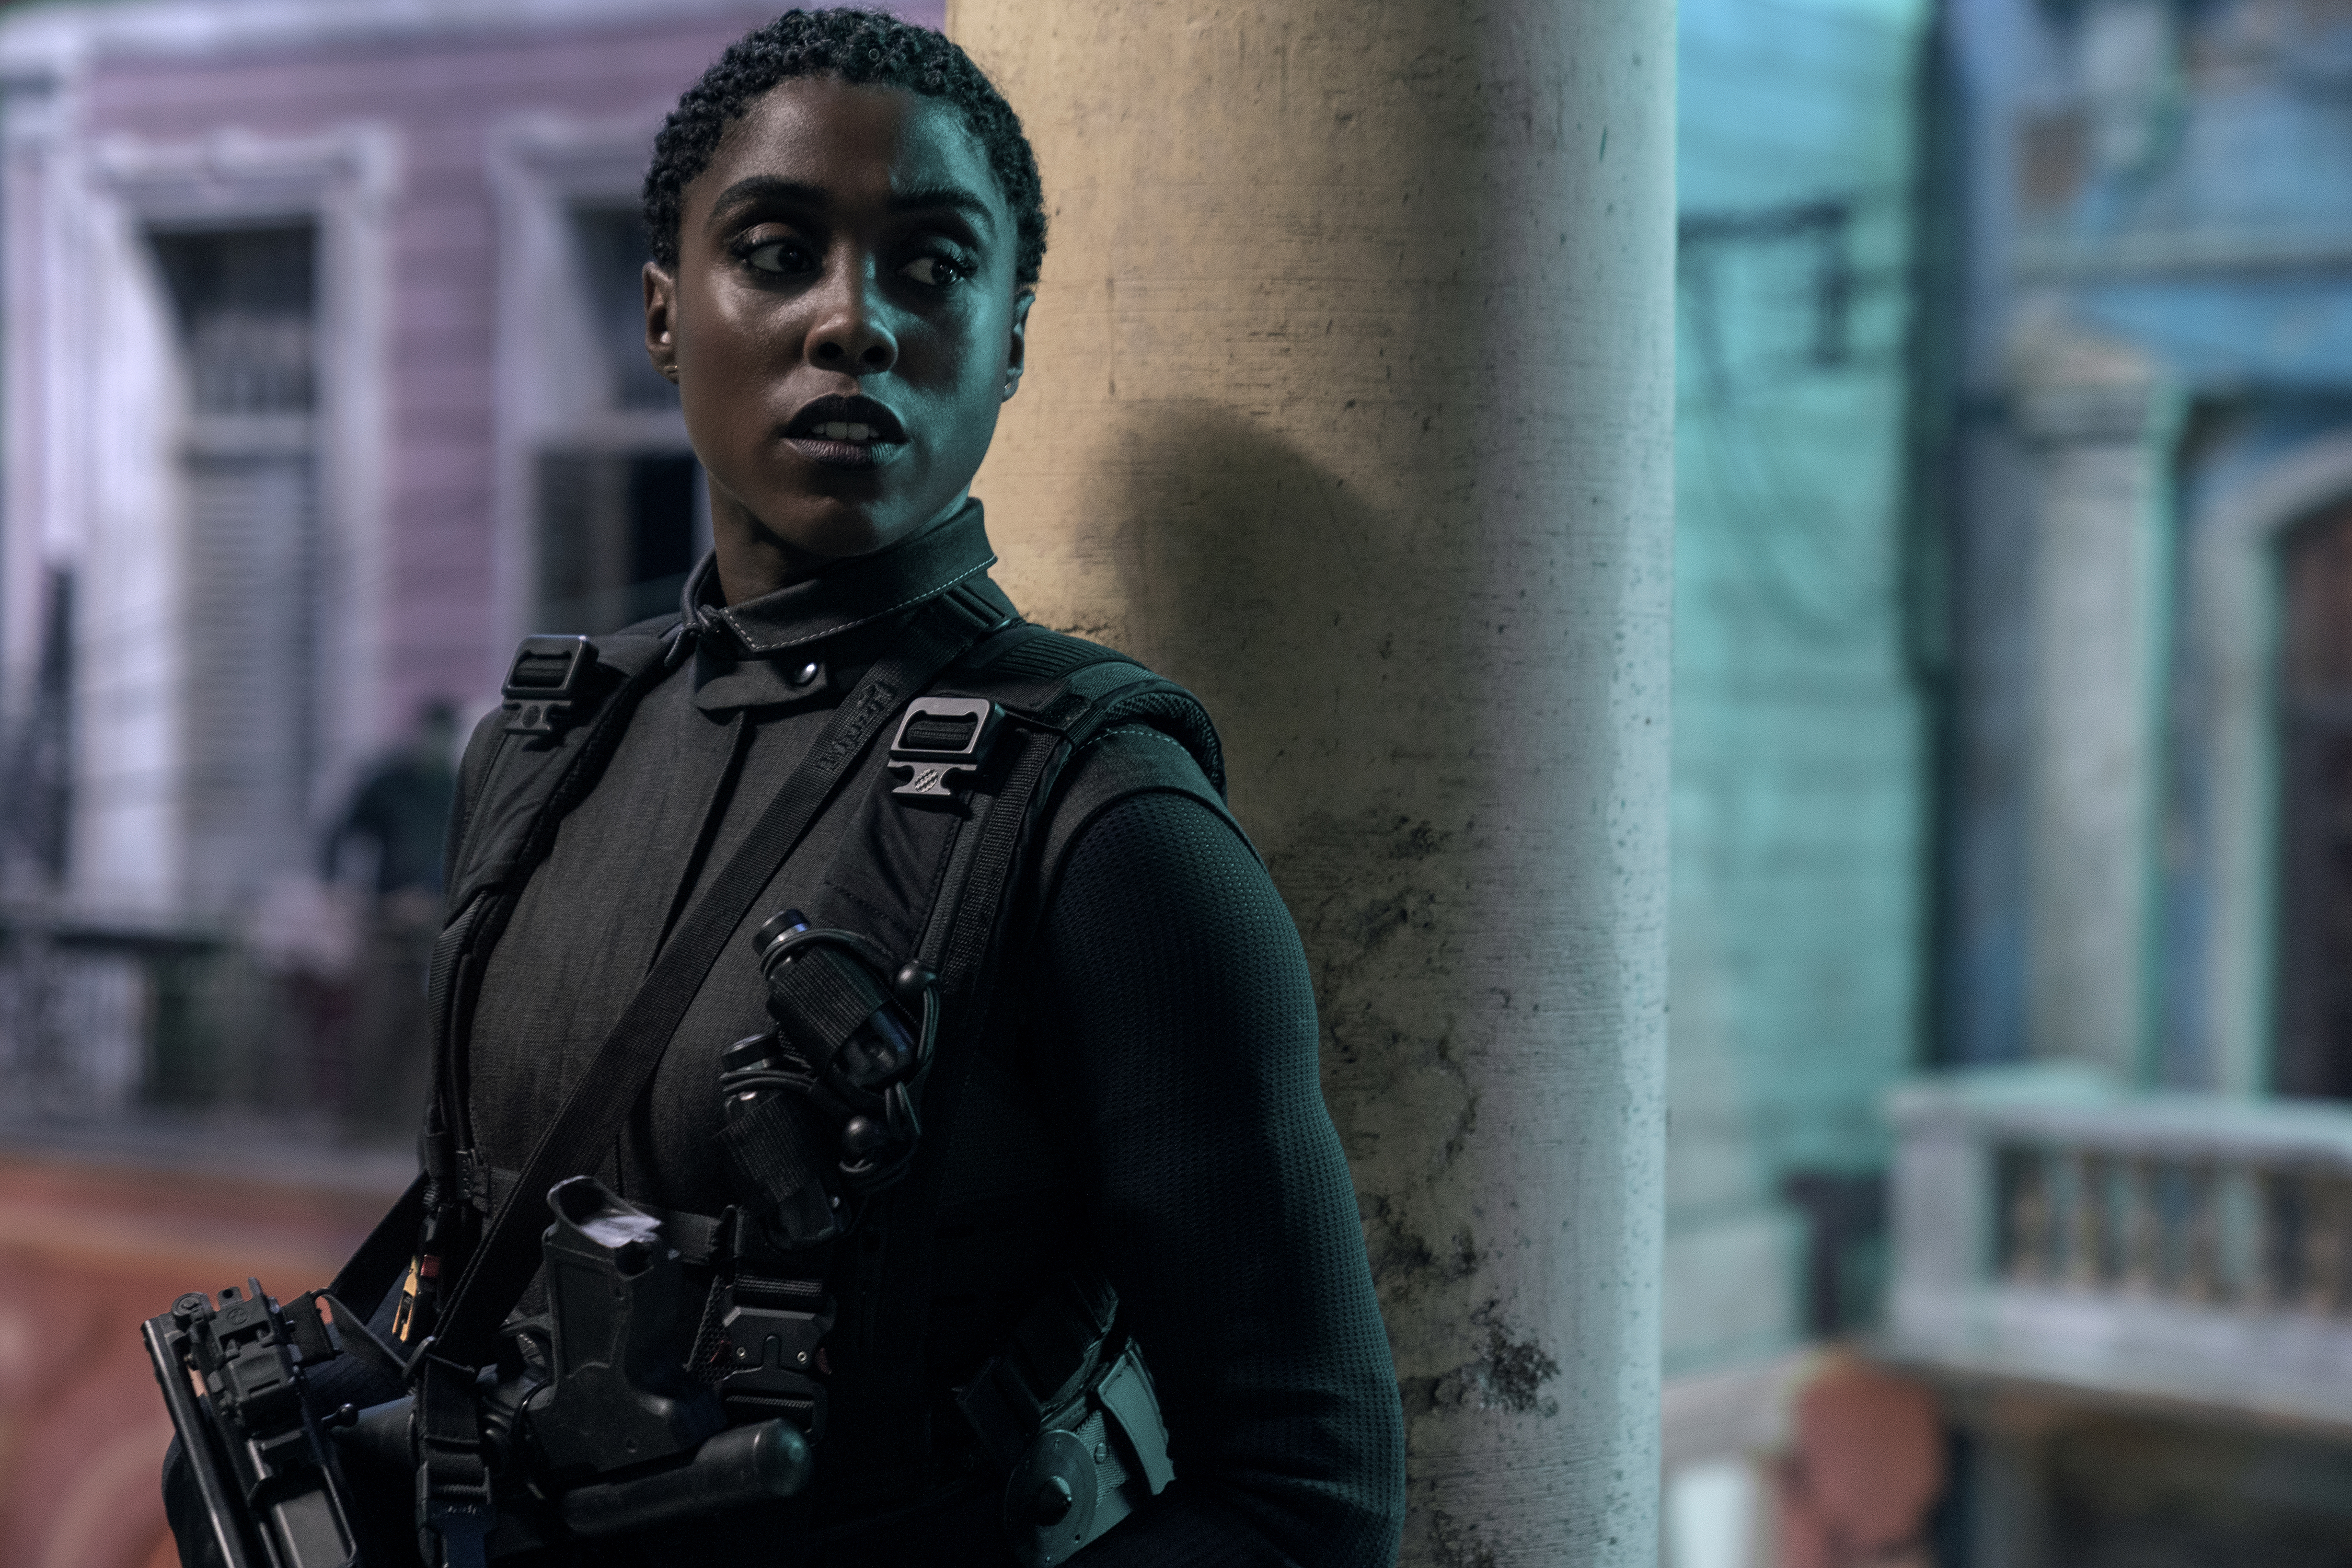 B25_08653_RC2 Nomi (Lashana Lynch) is ready for action in Cuba in 'No Time to Die' (Nicola Dove—© 2020 DANJAQ, LLC AND MGM. ALL RIGHTS RESERVED.)